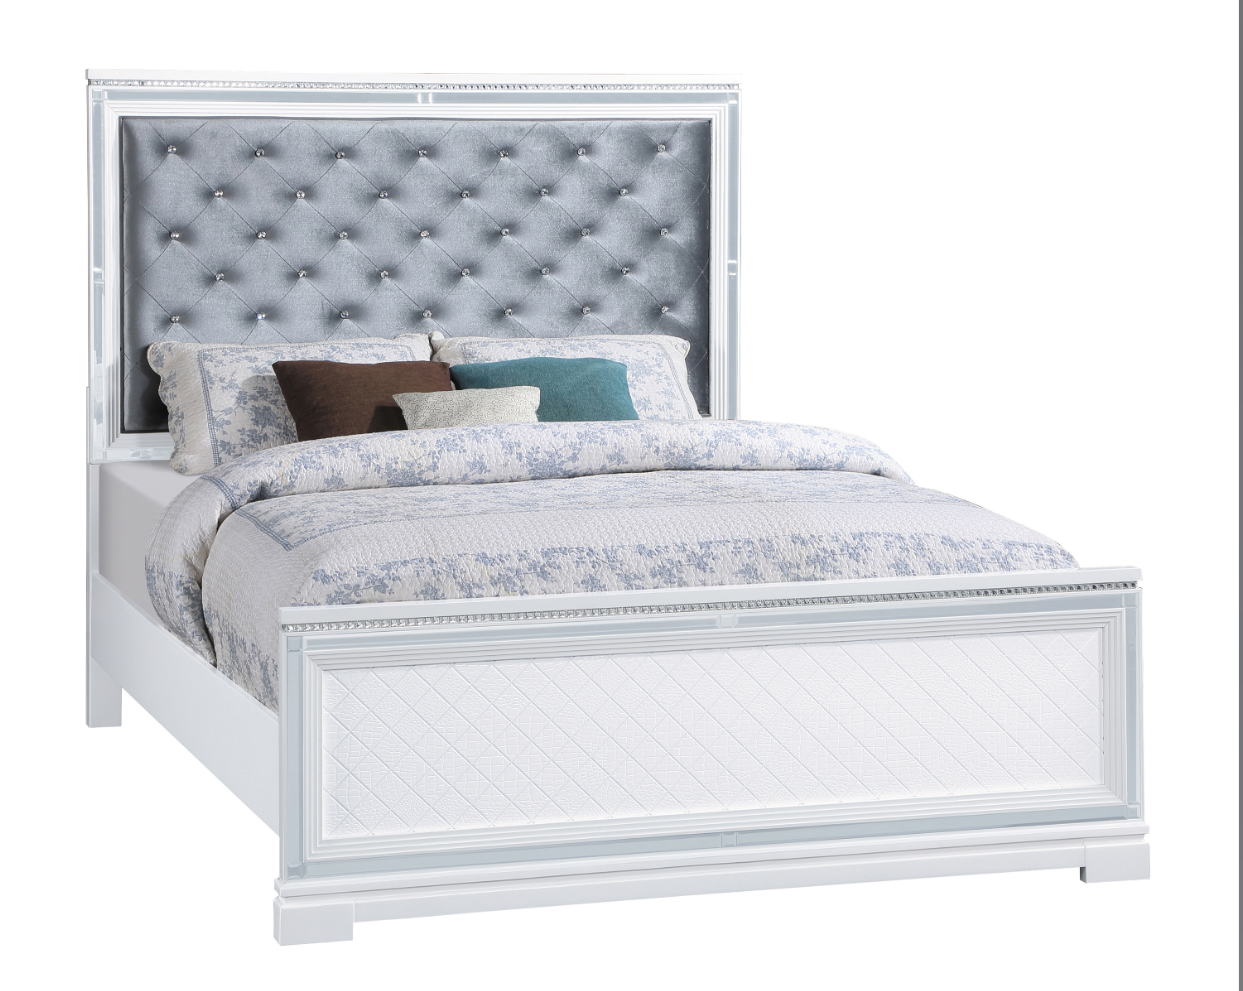 Eleanor Collection Queen Bed with Upholstered Headboard in White